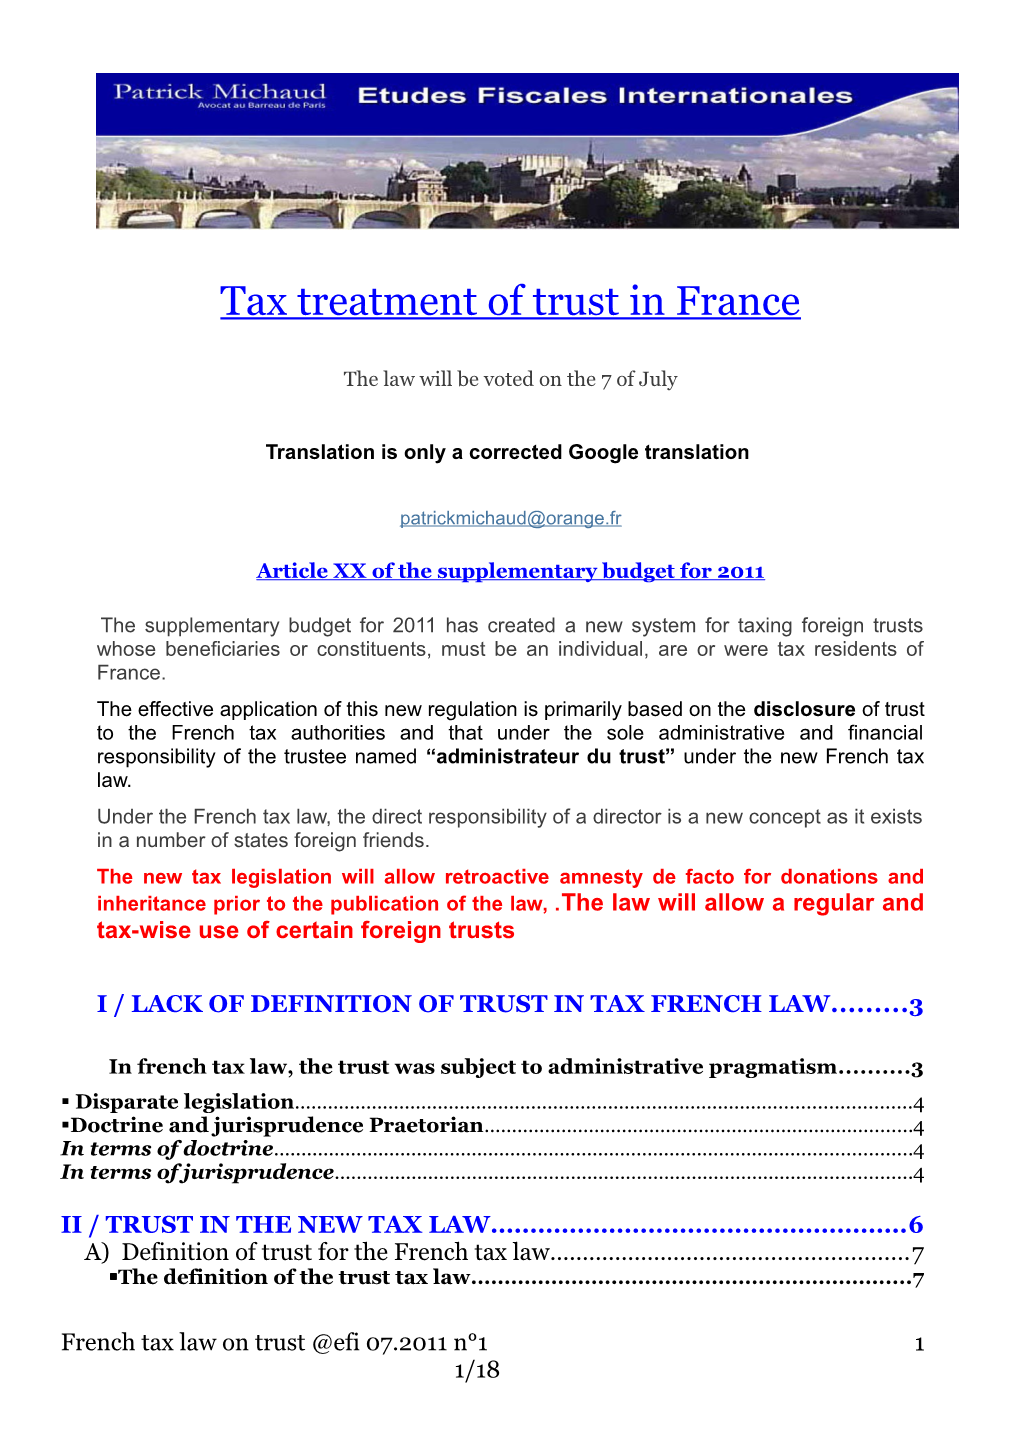 Tax Treatment of Trusts in France